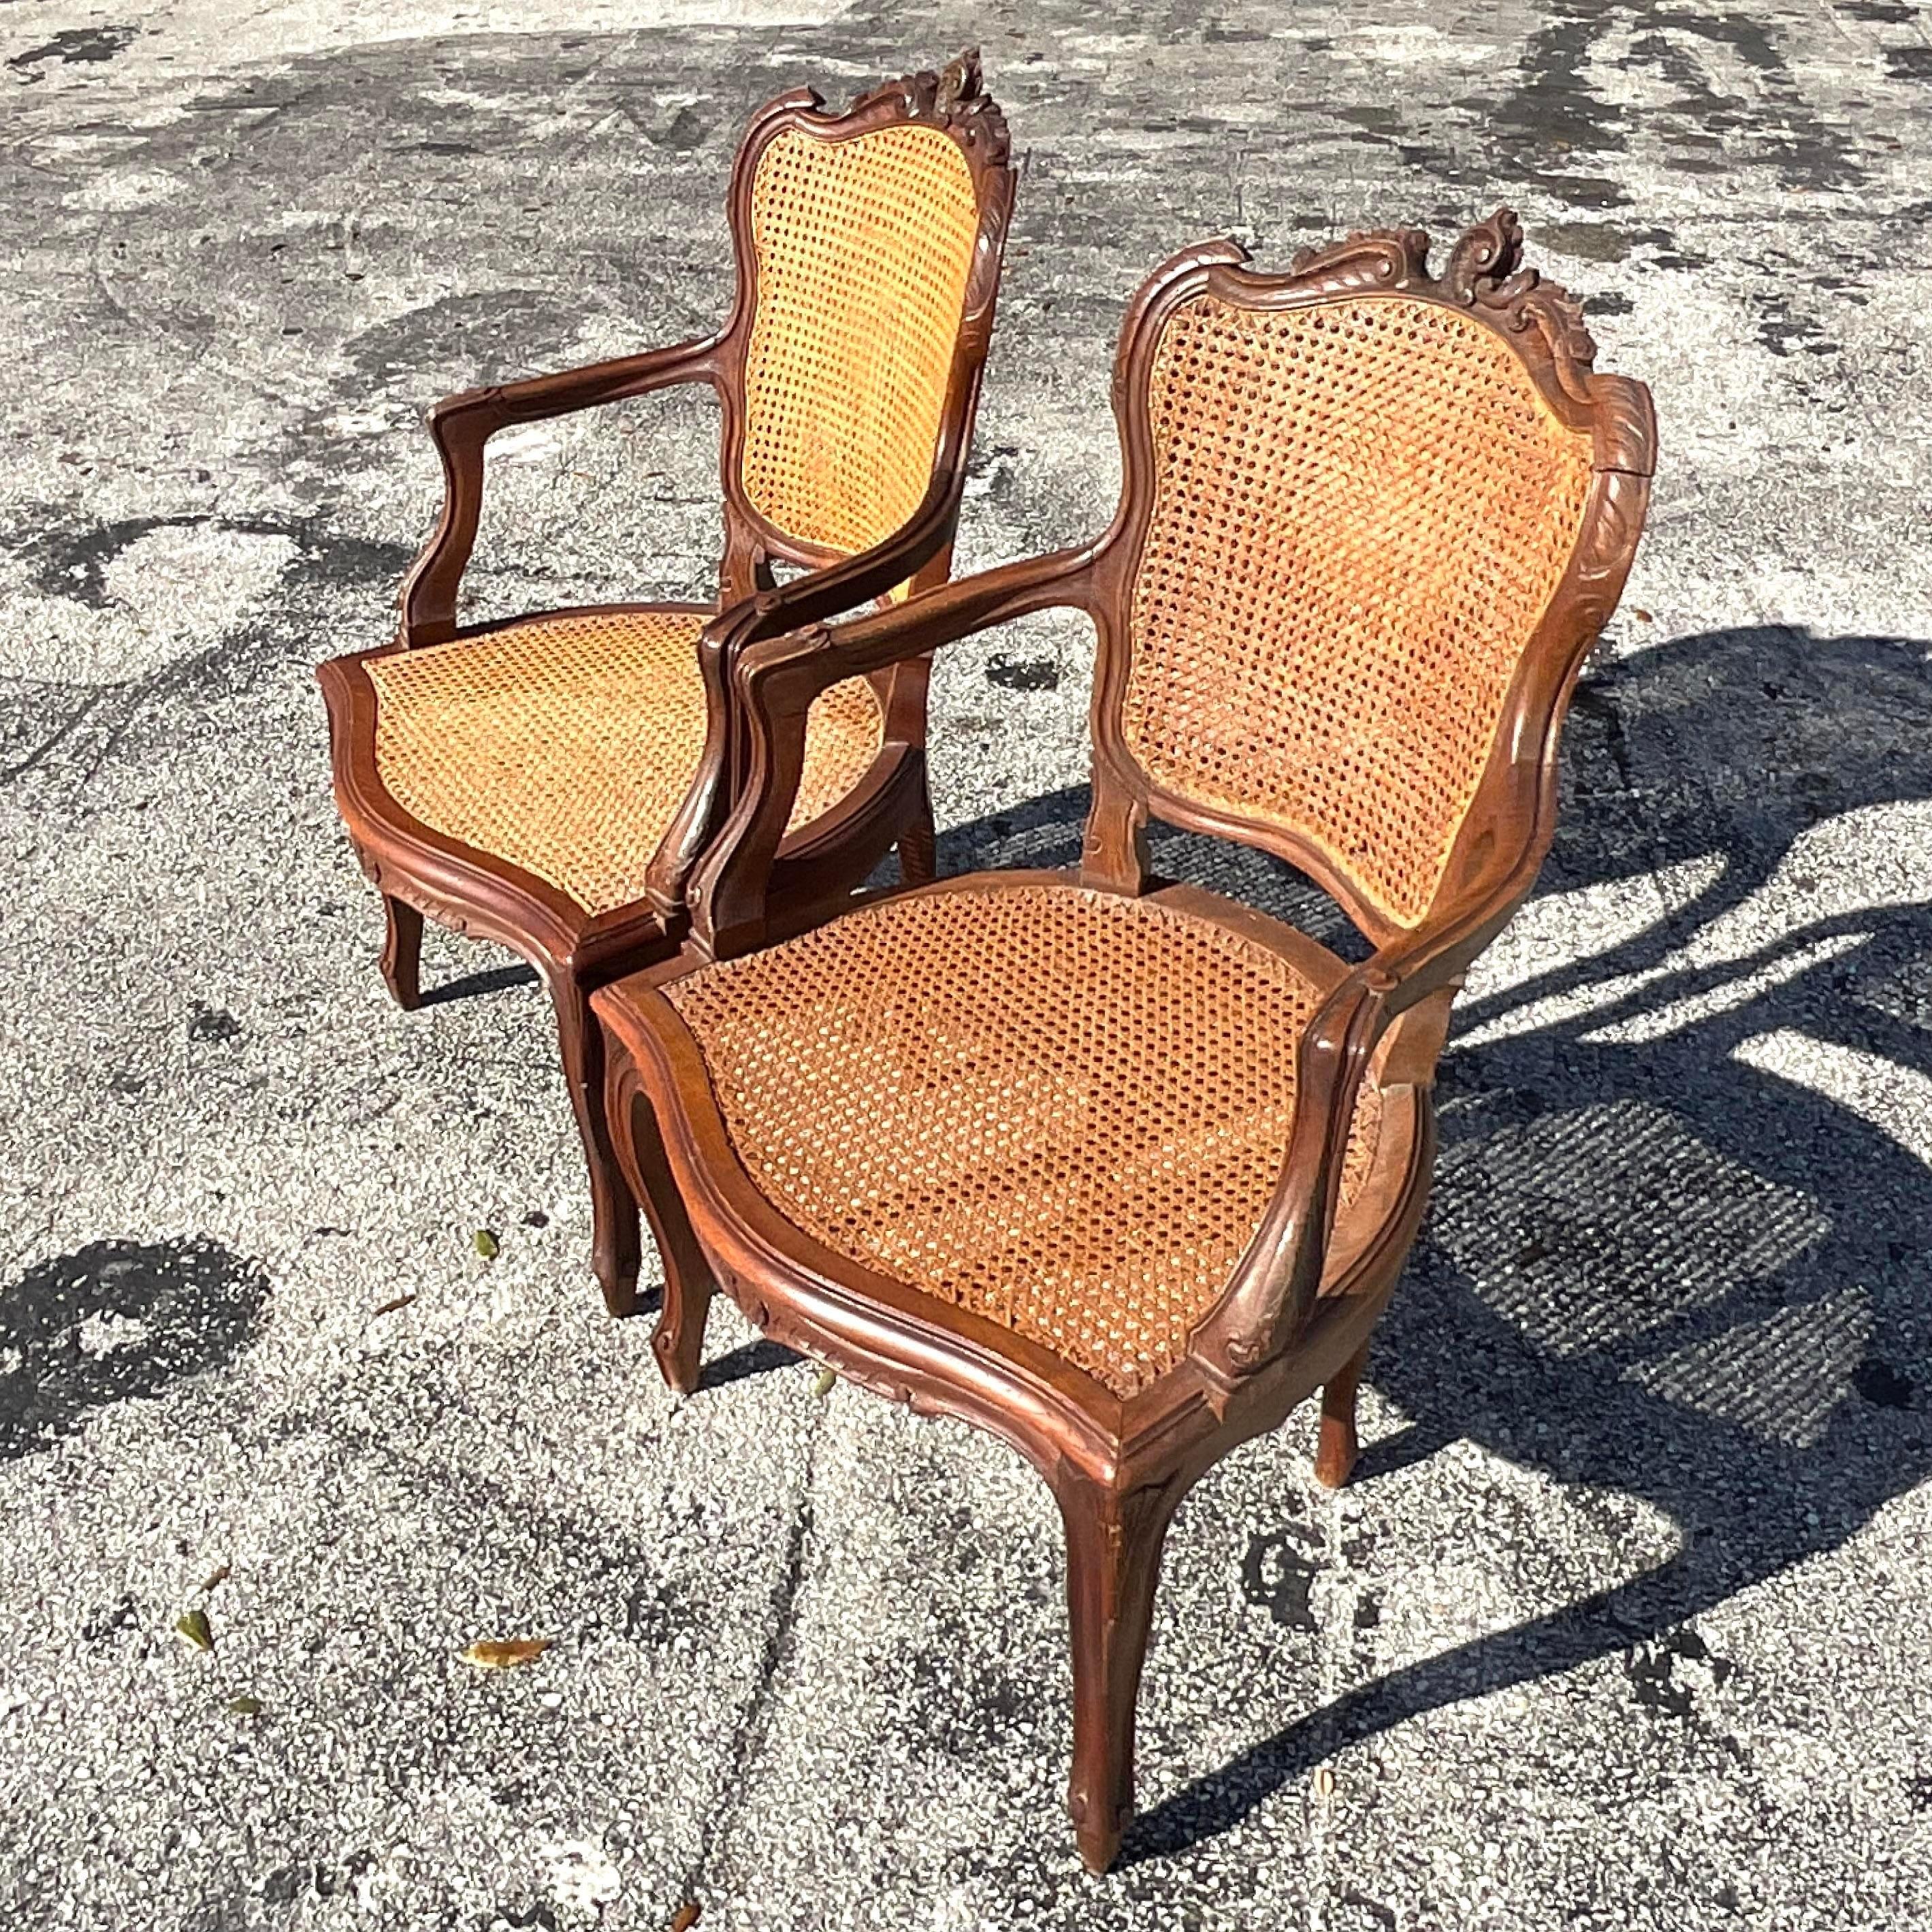 A fabulous pair of vintage Boho arm chairs. Beautiful hand carved detail with chic inset cane panels. Acquired from a Palm Beach estate.